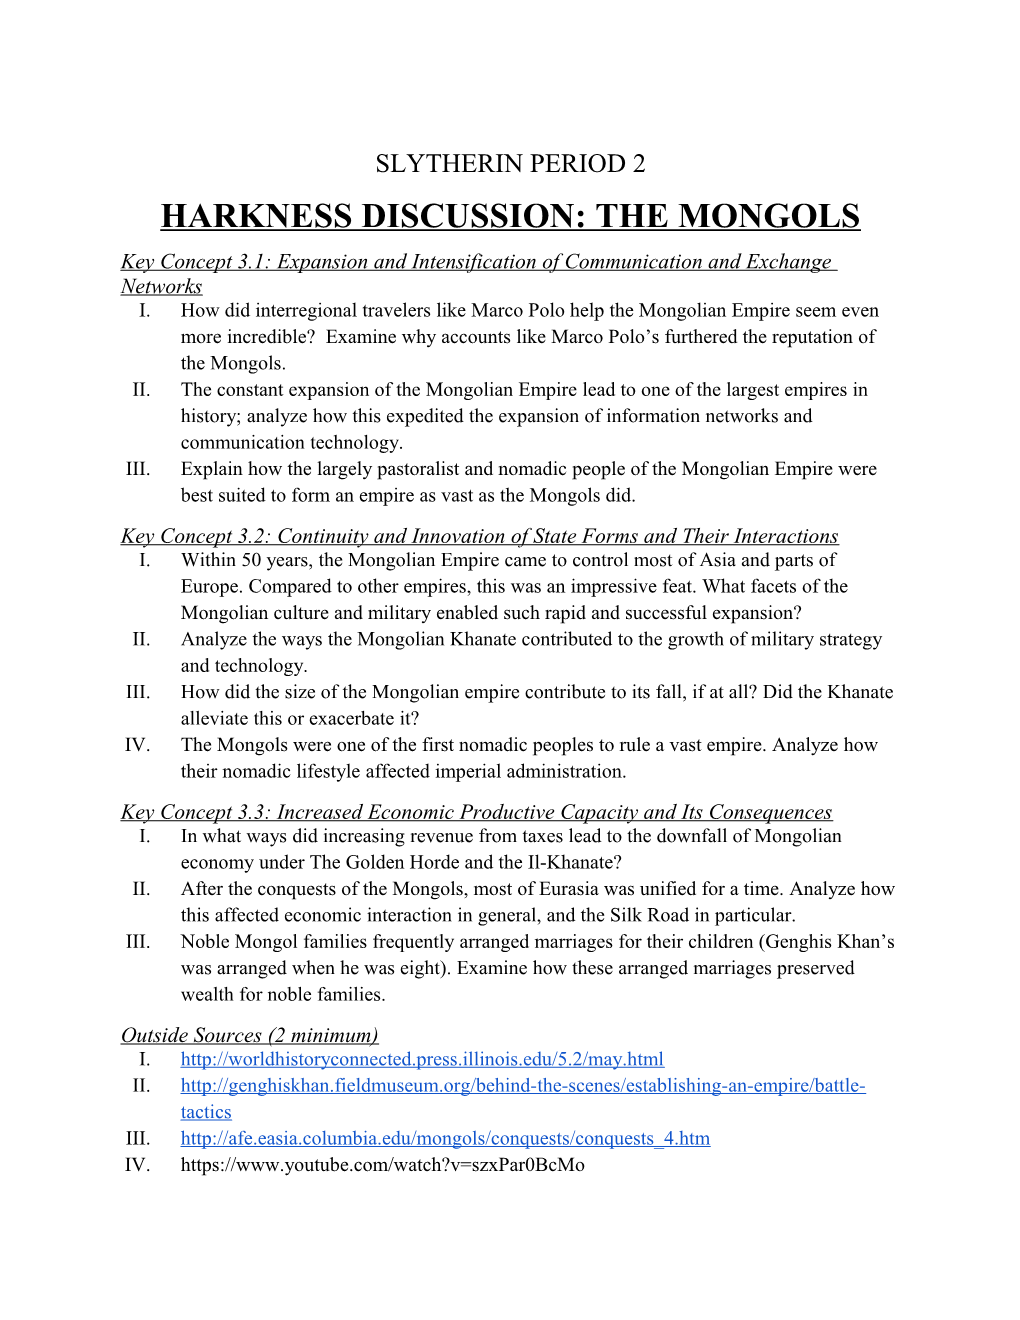 Harkness Discussion: the Mongols